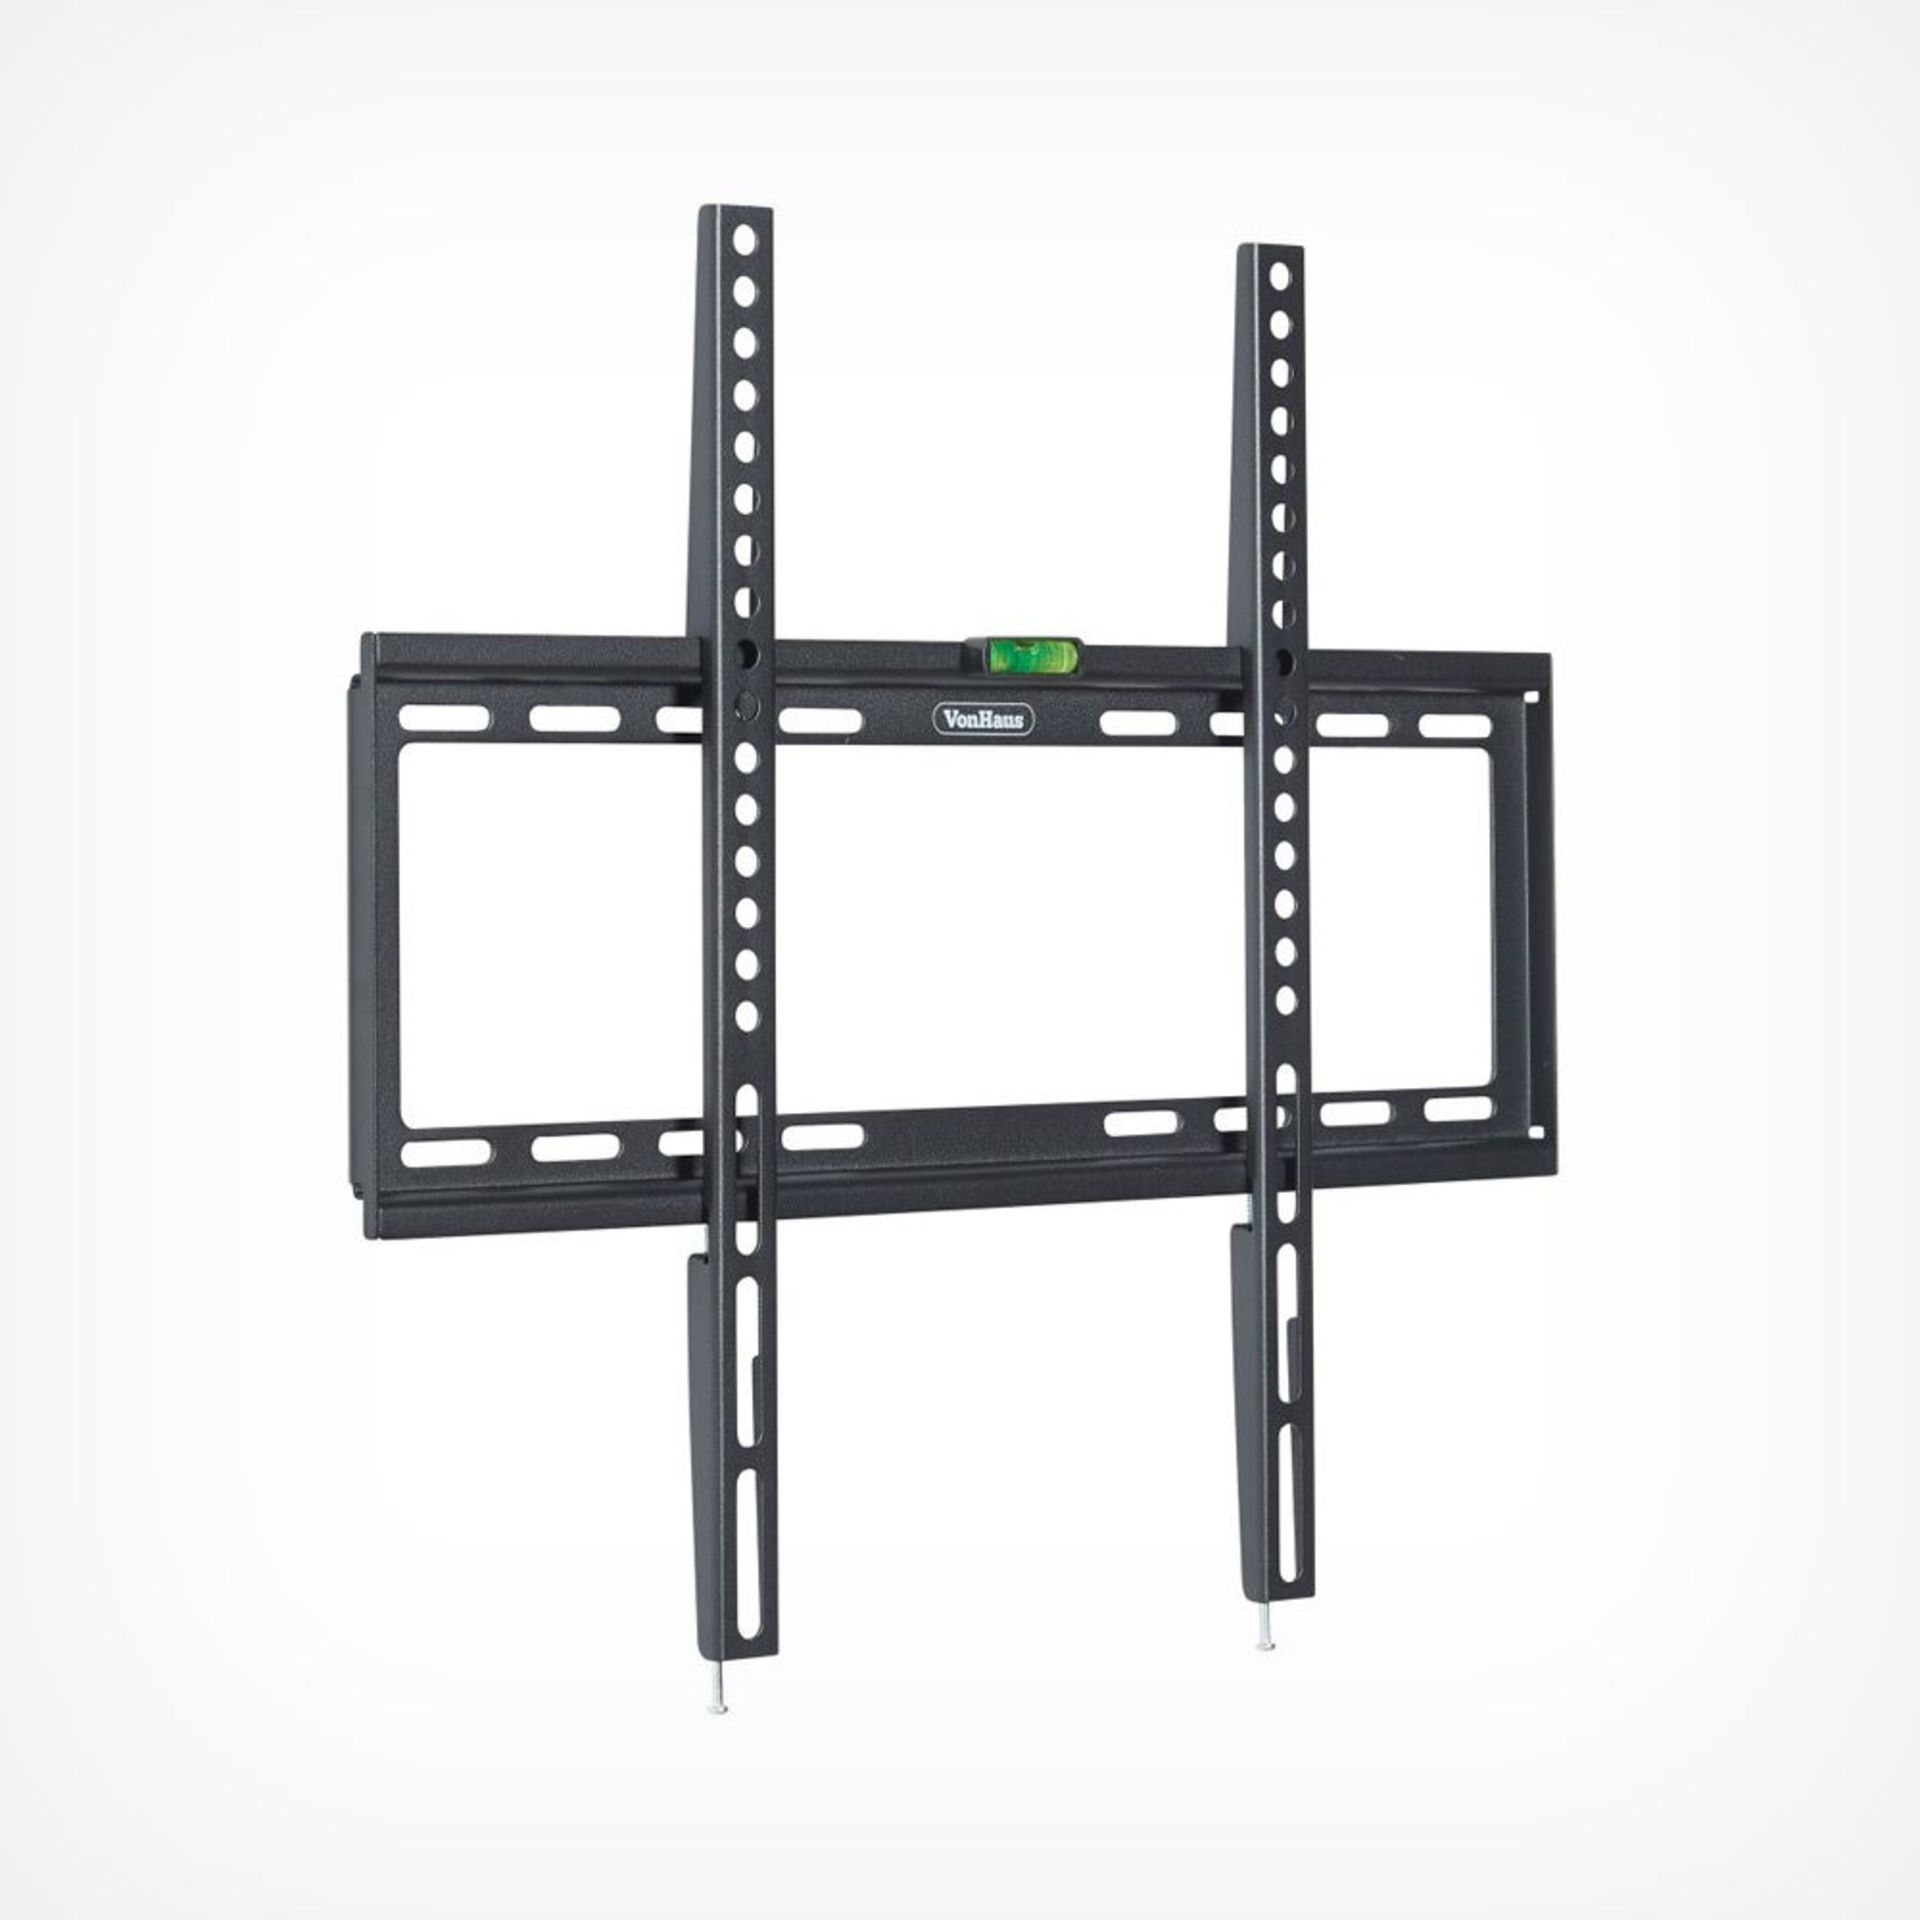 4 x 32-55 inch Flat-to-wall TV bracket. With easy to follow, comprehensive assembly instructions